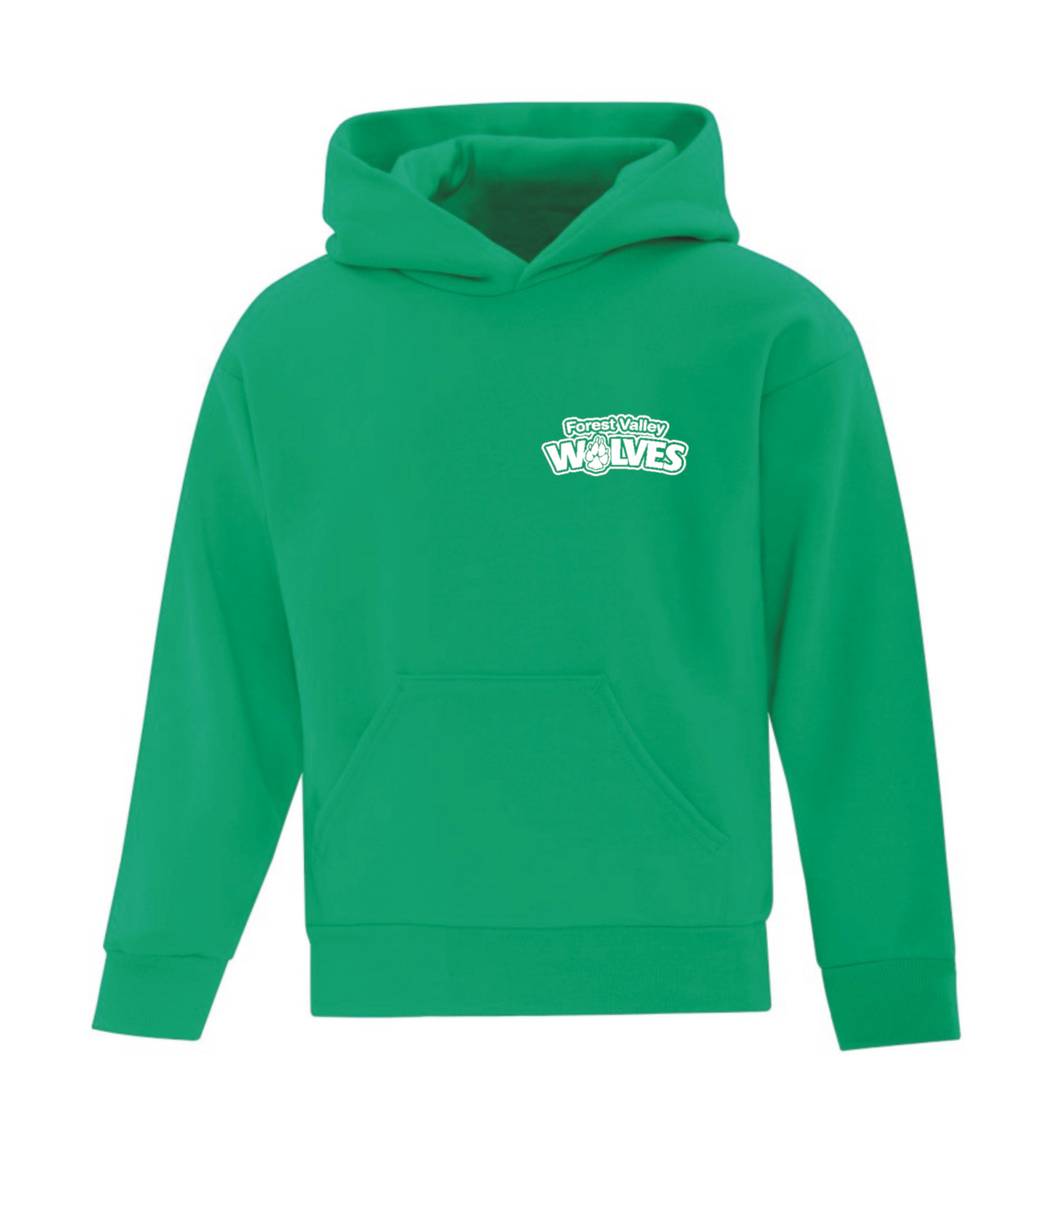 Youth Hoodie - Forest Valley Elementary School